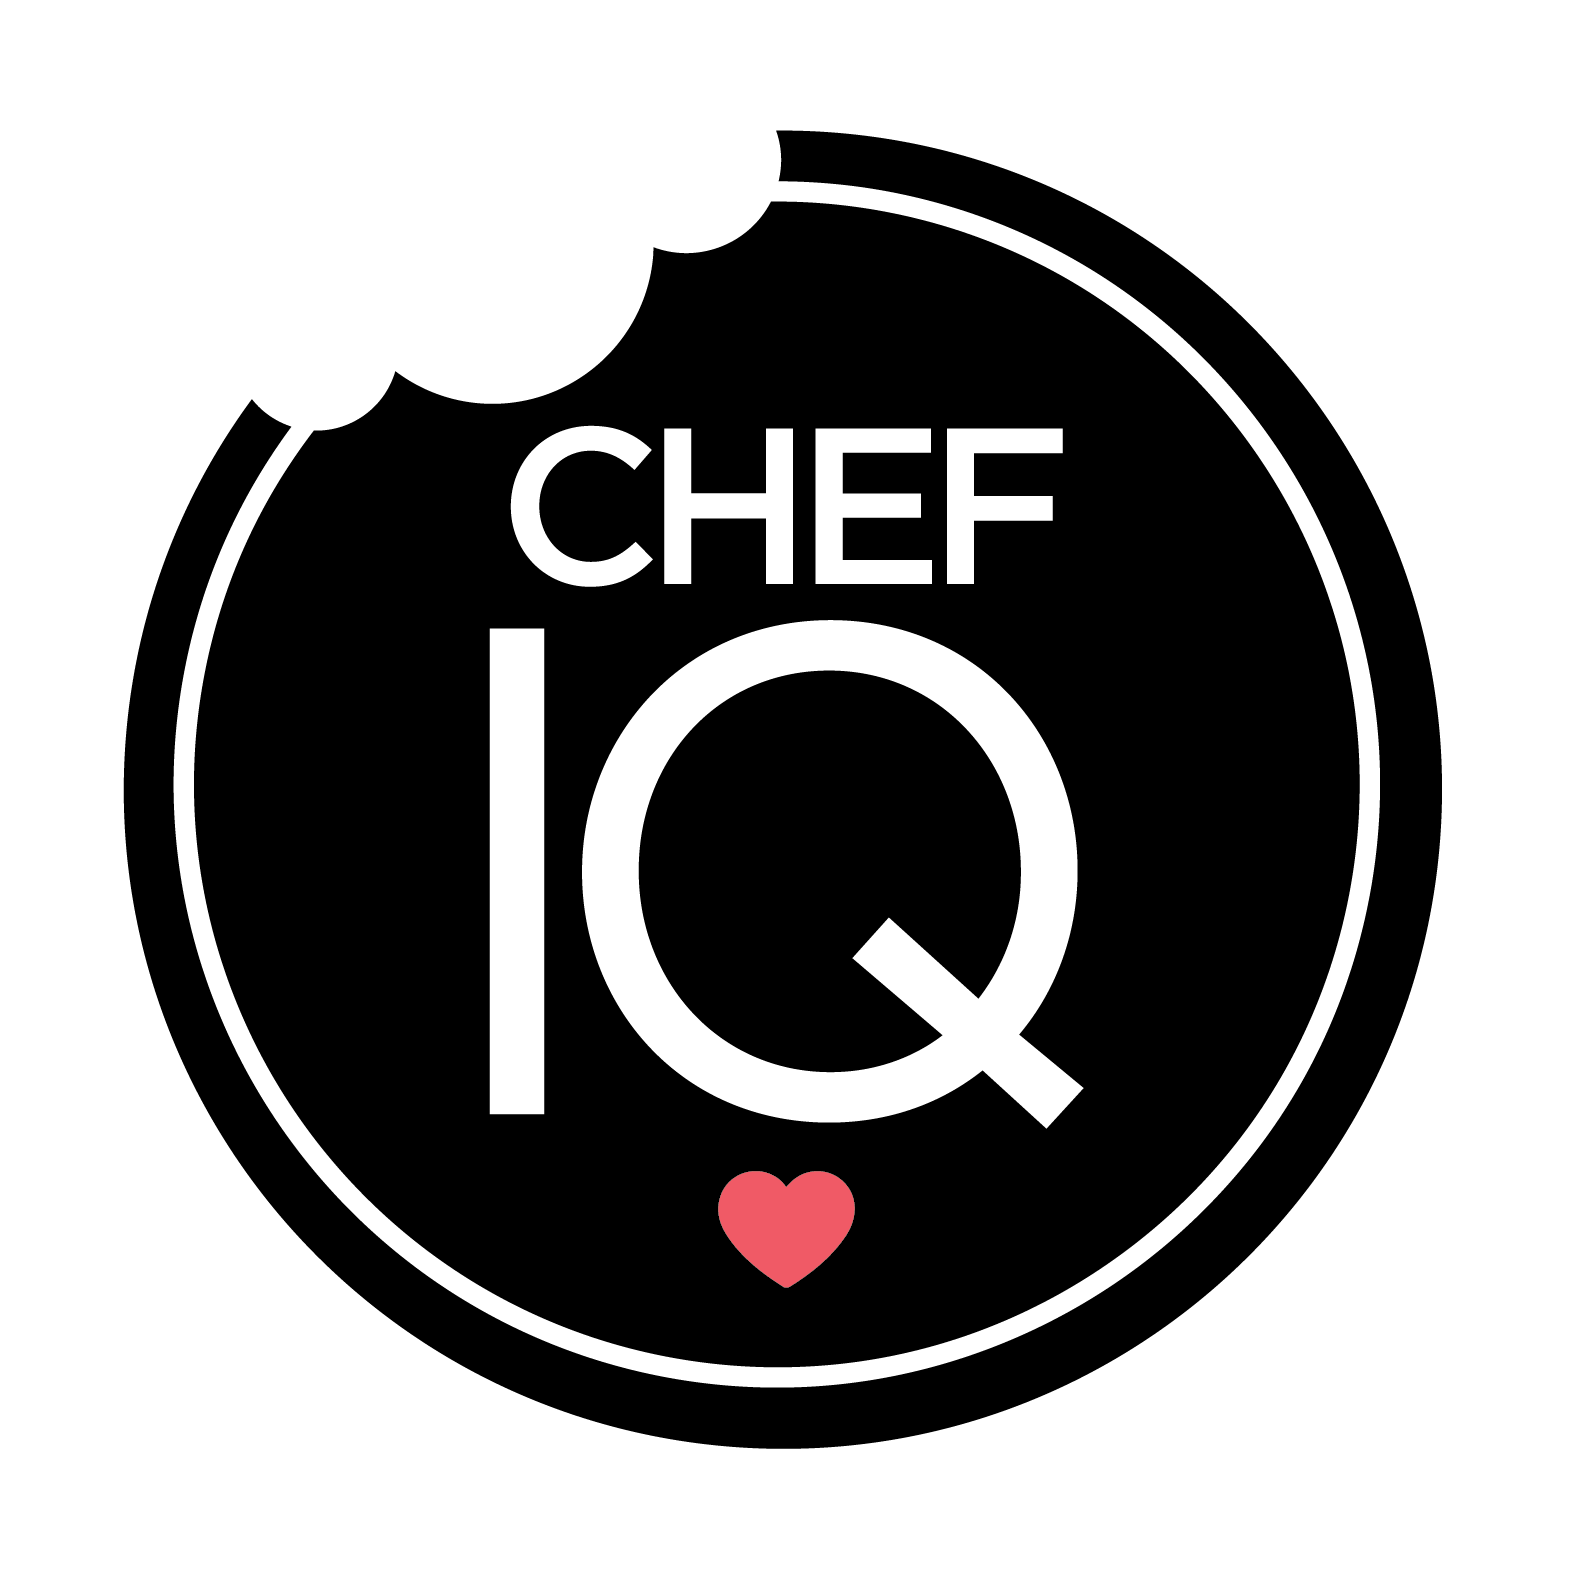 It's time to elevate your cooking game. The CHEF iQ Smart